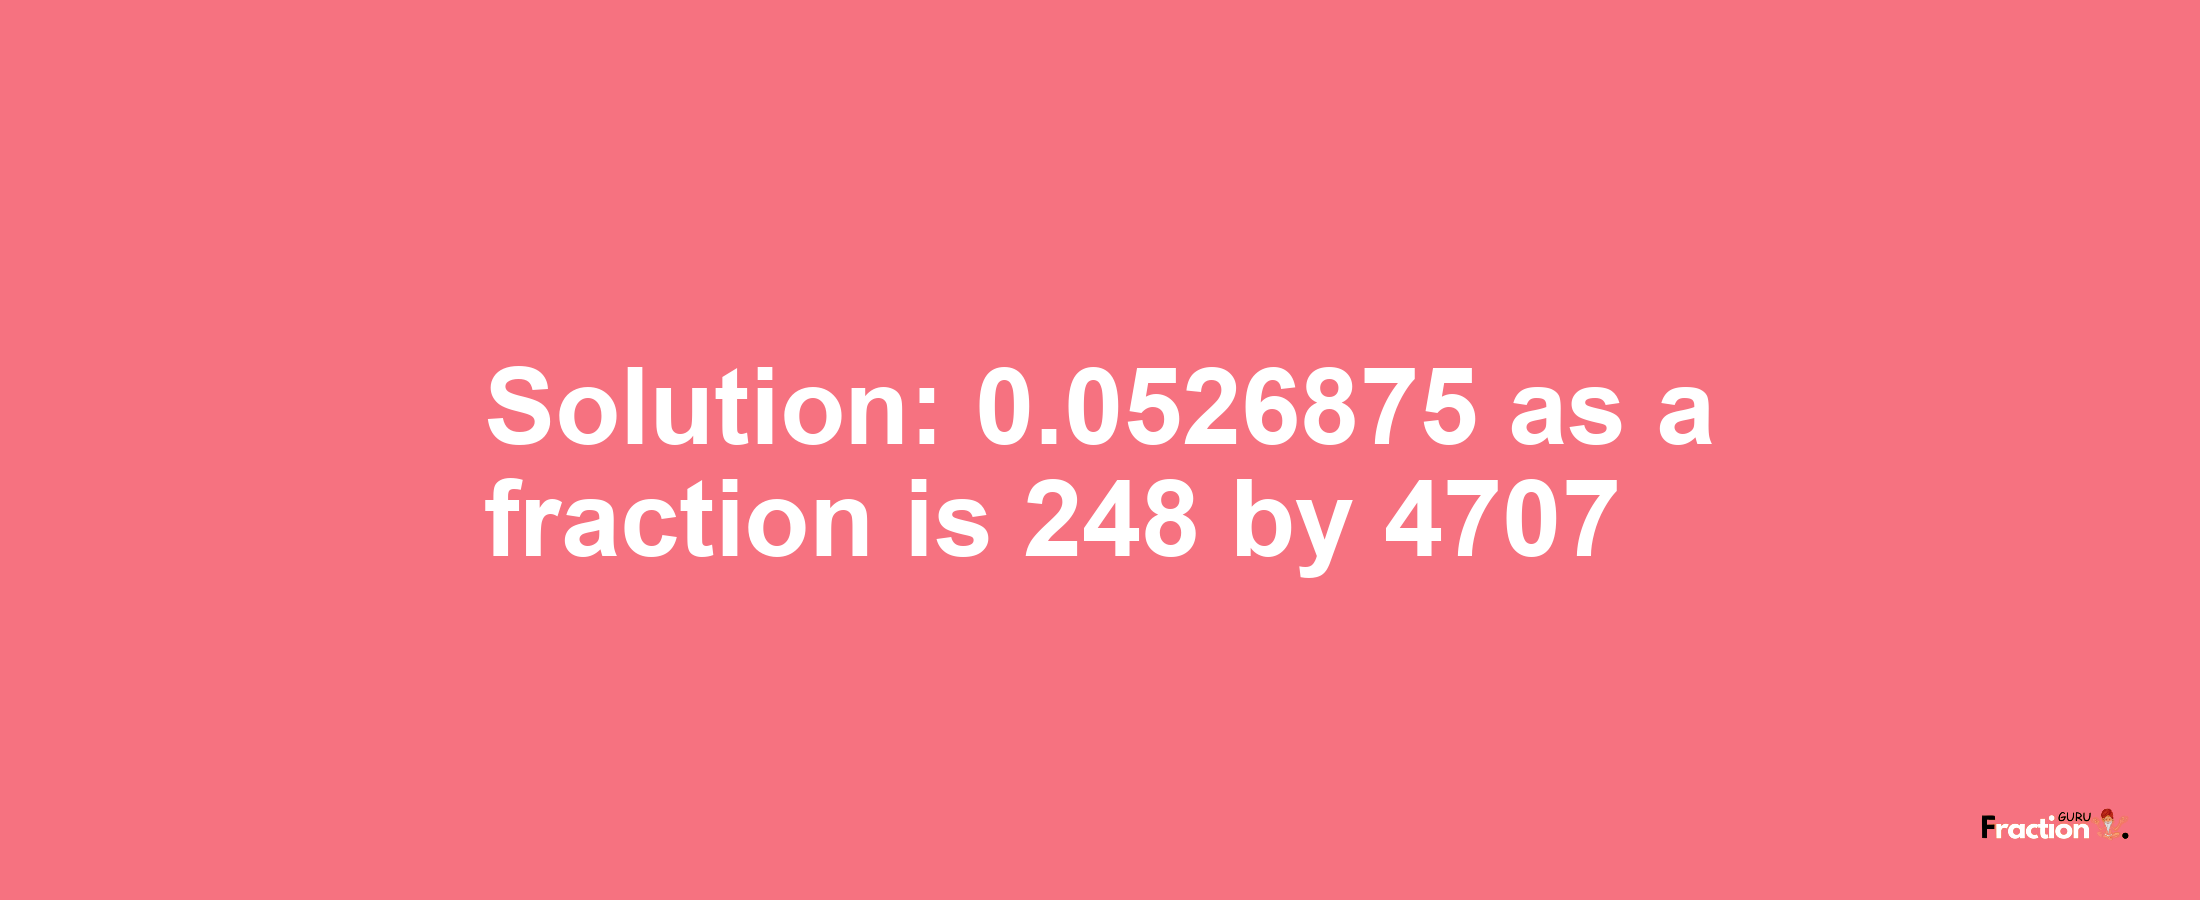 Solution:0.0526875 as a fraction is 248/4707